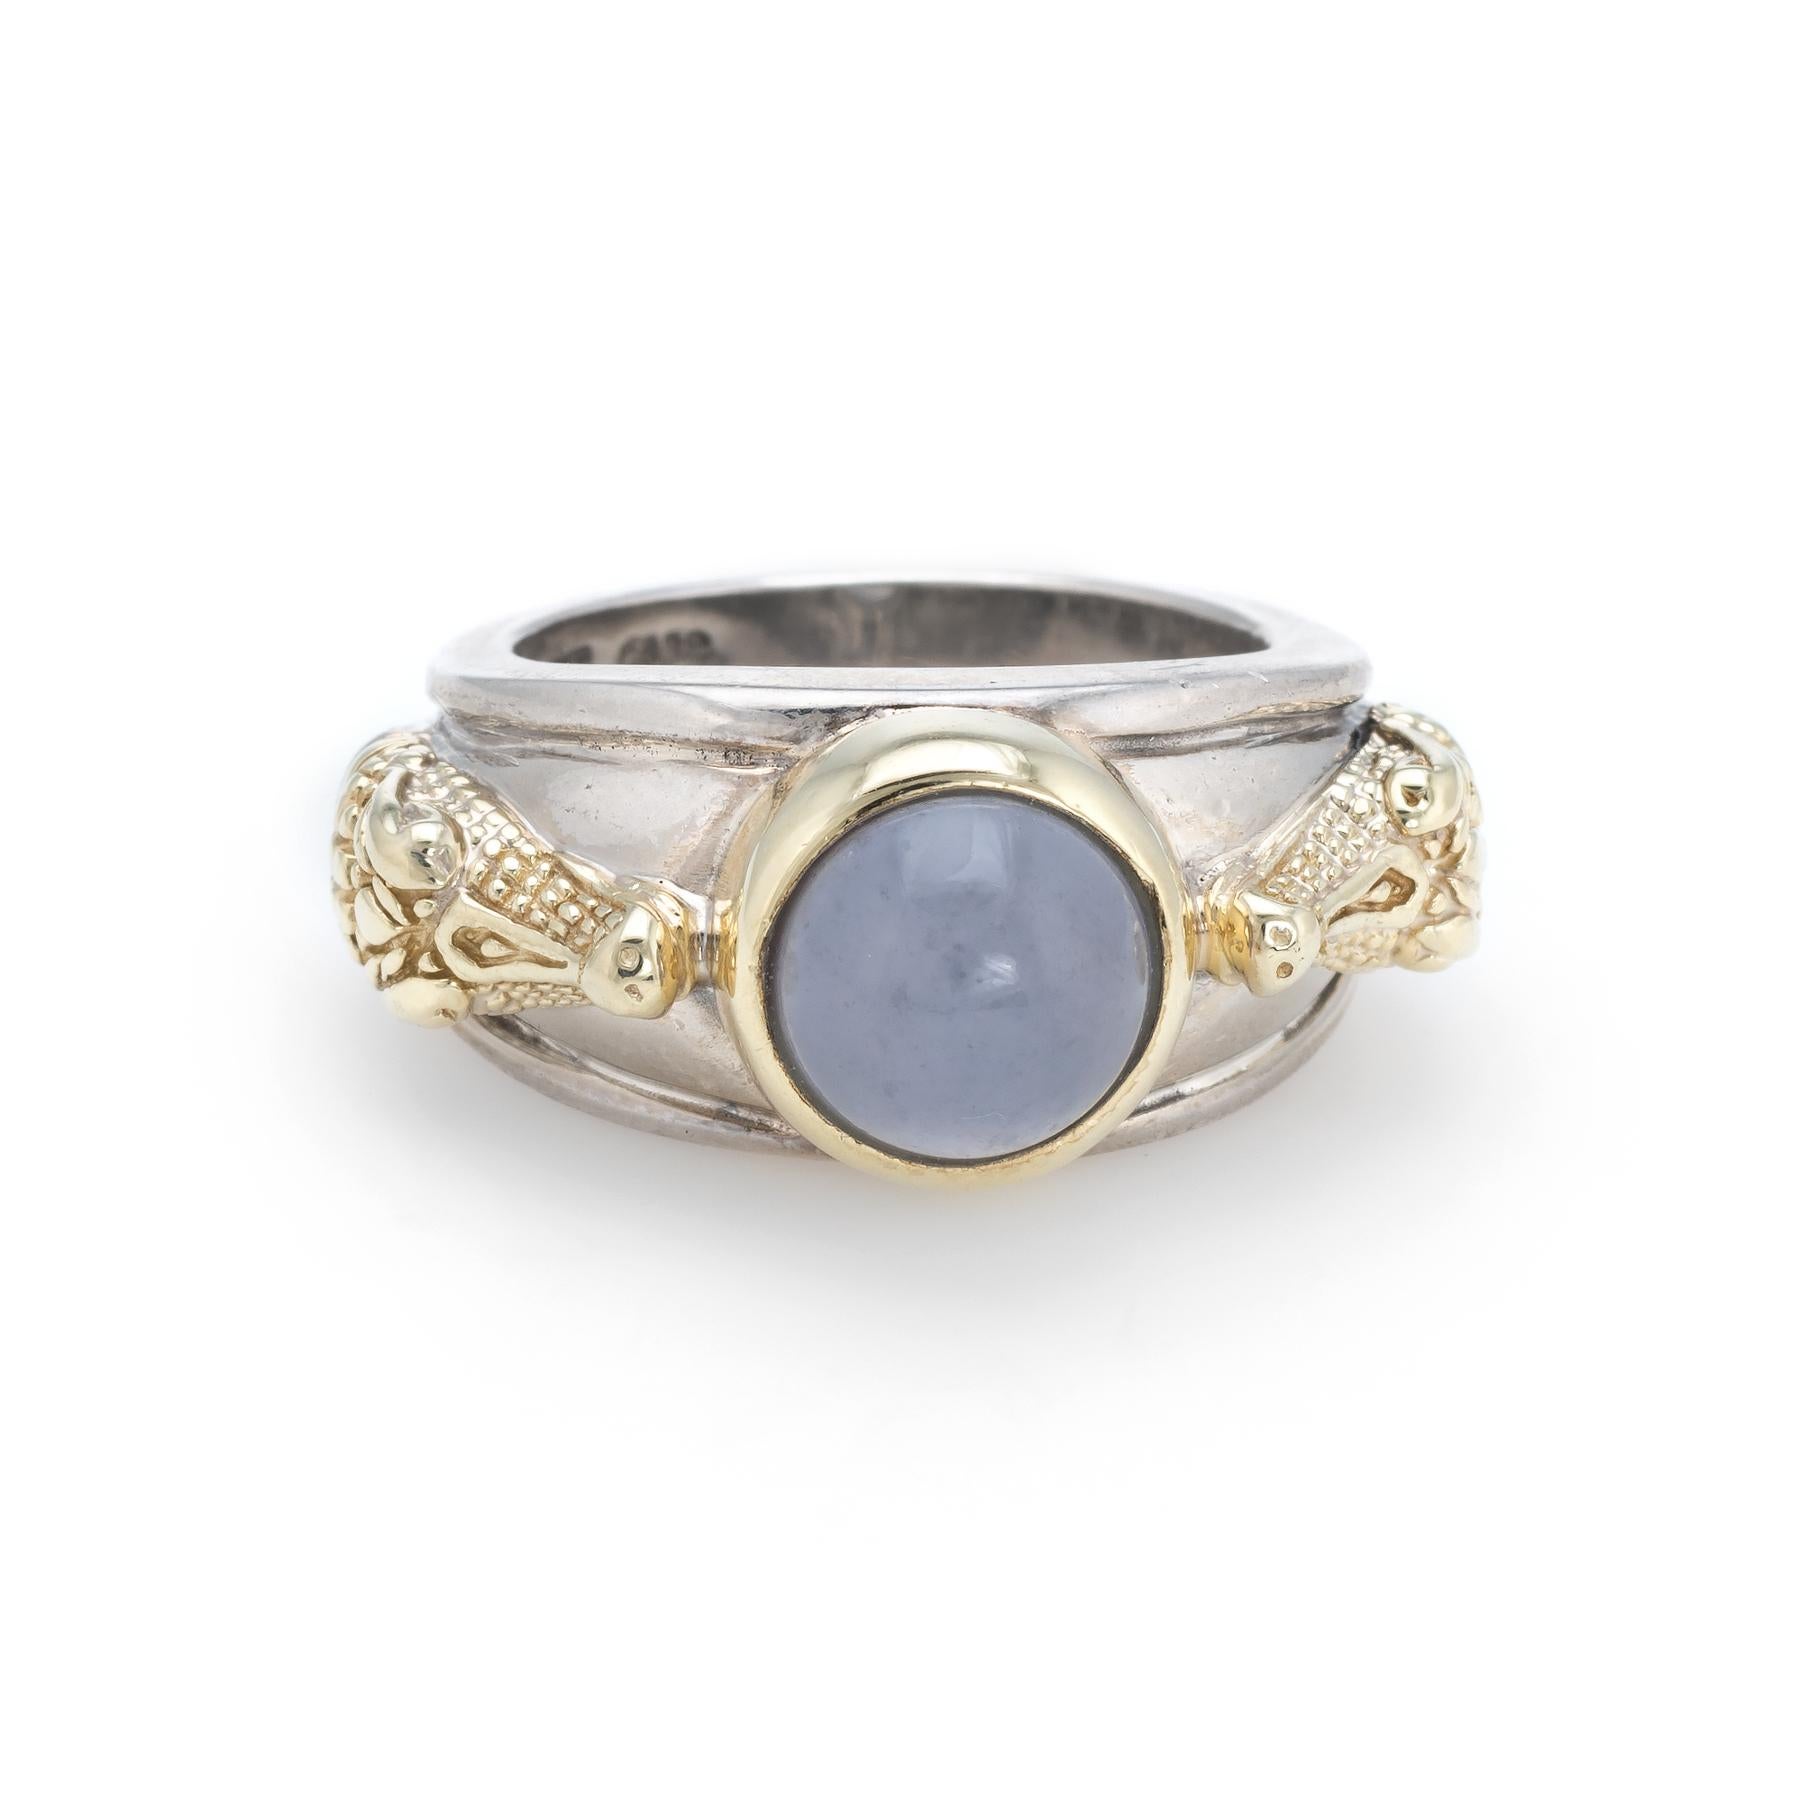 Estate Barry Kieselstein Cord blue chalcedony alligator ring, crafted in sterling silver and 14 karat yellow gold. 

Blue chalcedony is cabochon cut measuring 8mm. The chalcedony is in excellent condition and free of cracks or chips.

The ring is